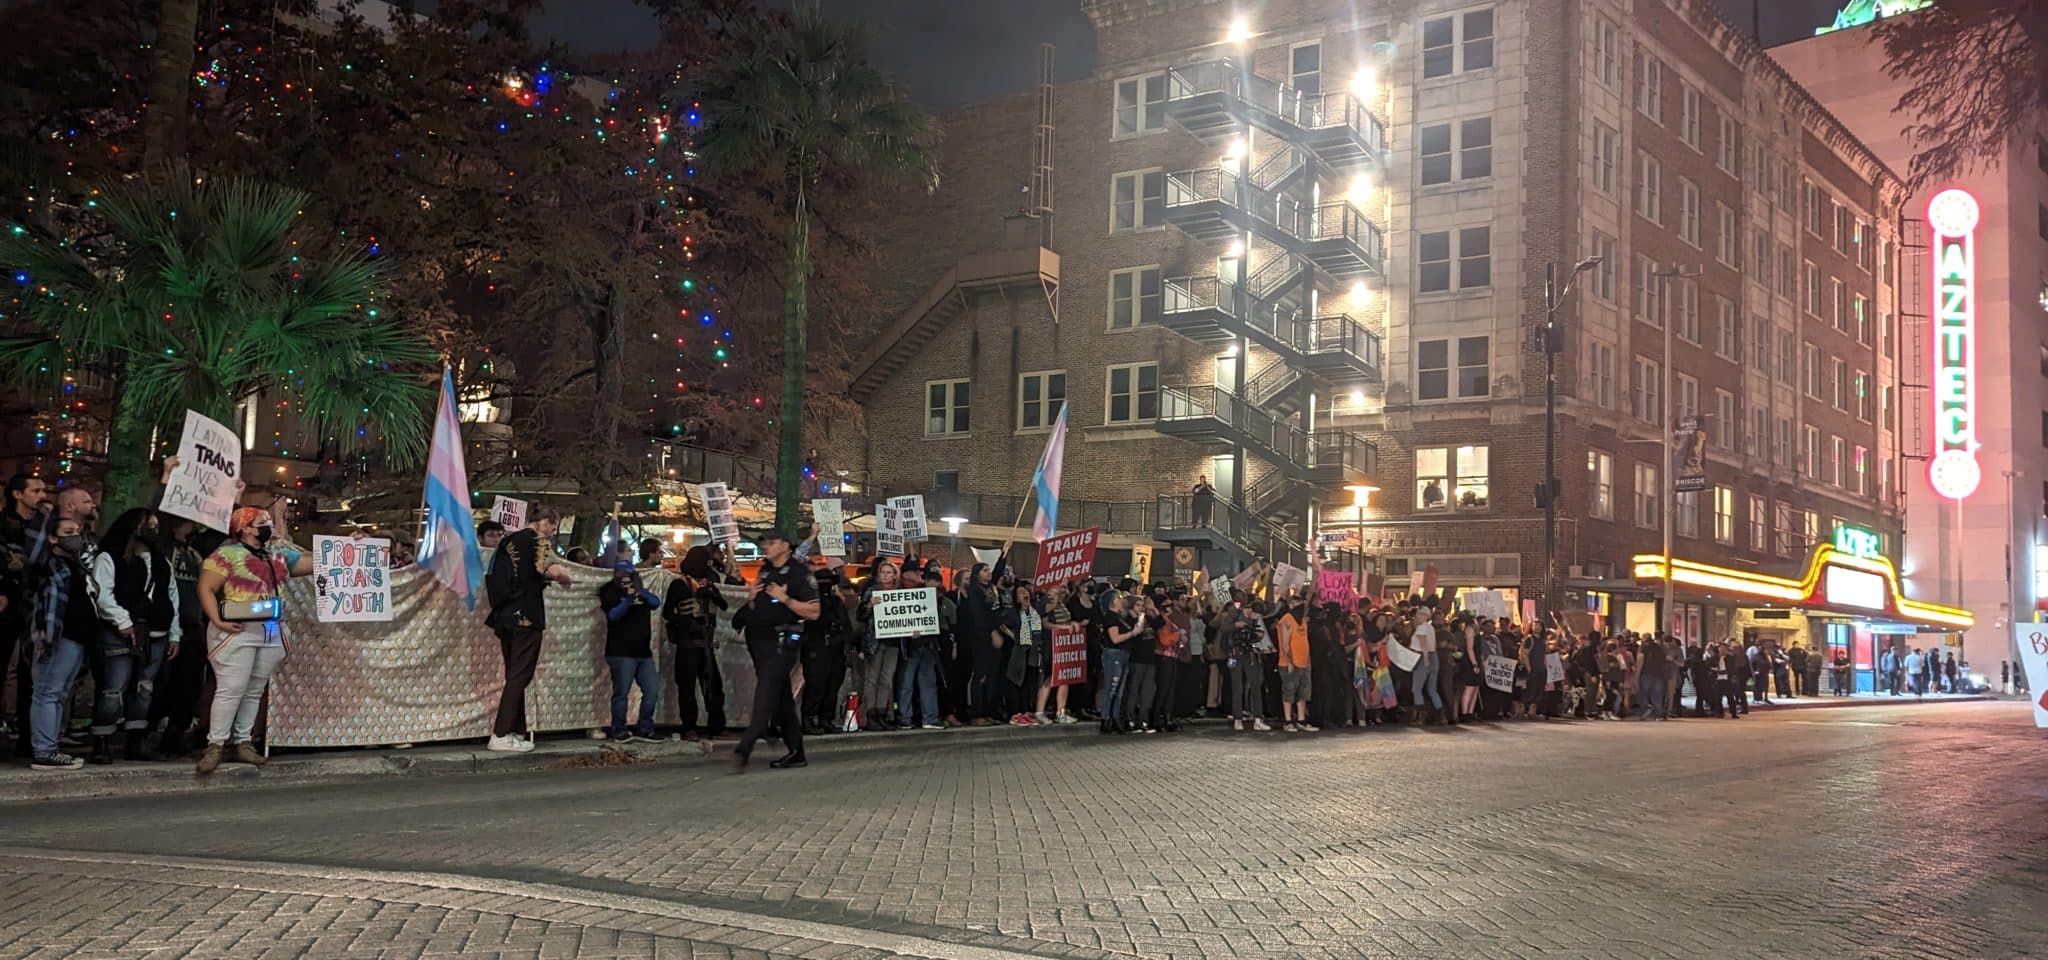 | AT PROTESTS OUTSIDE DRAG EVENTS IN BOTH SAN ANTONIO AND GRAND PRAIRIE TEXAS PRO LGBTQ+ COMMUNITY MEMBERS FAR OUTNUMBERED THEIR OPPONENTSSTEVEN MONACELLI TEXAS OBSERVER | MR Online